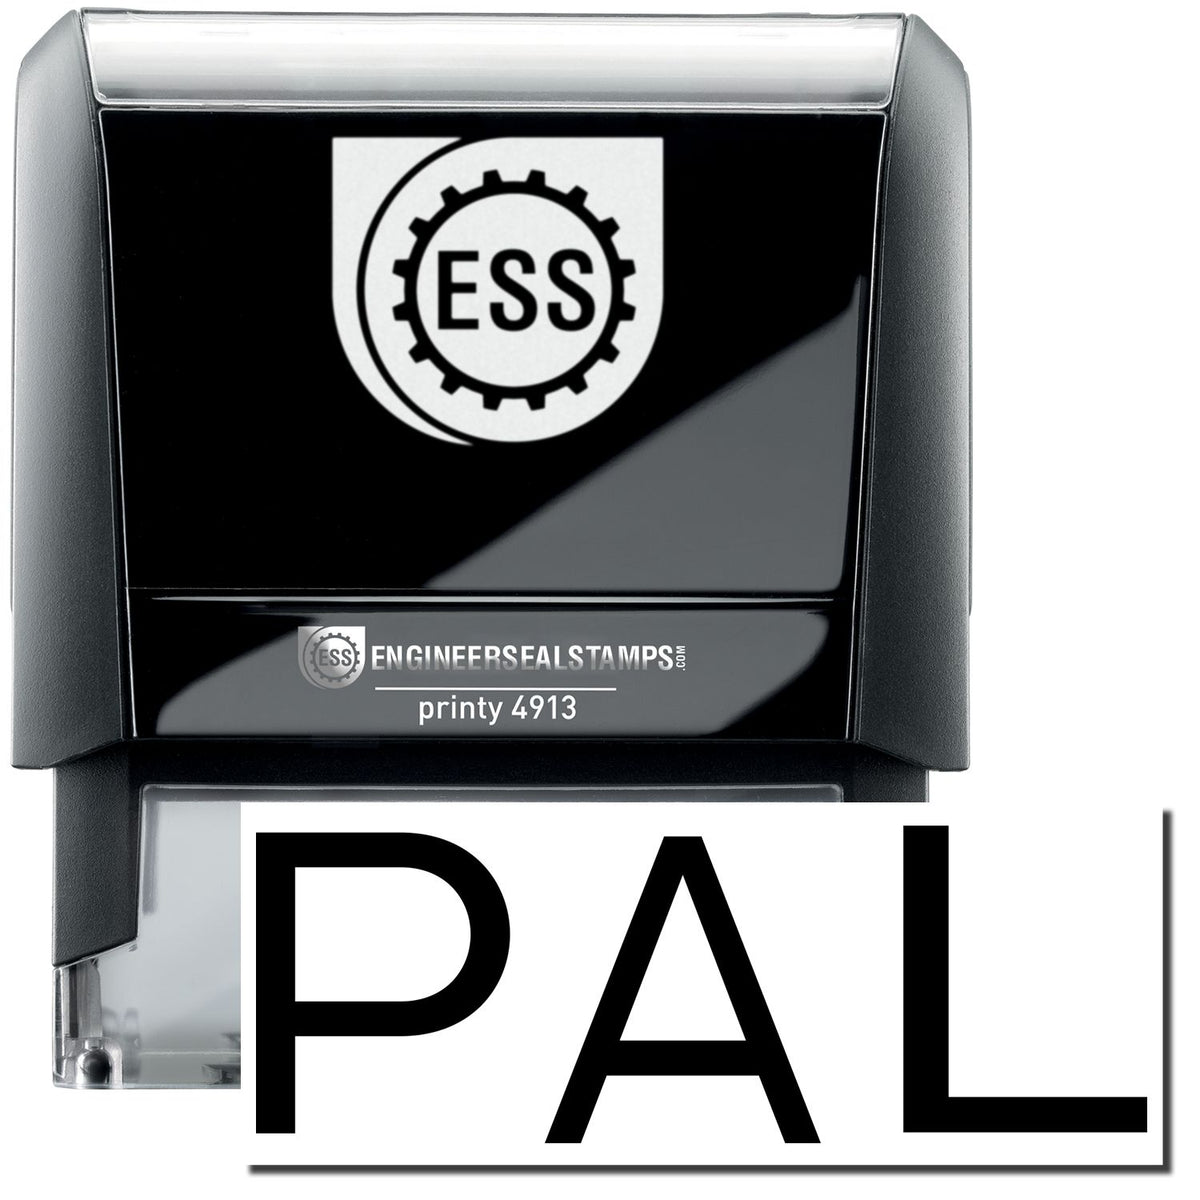 A self-inking stamp with a stamped image showing how the text &quot;PAL&quot; in a large font is displayed by it after stamping.